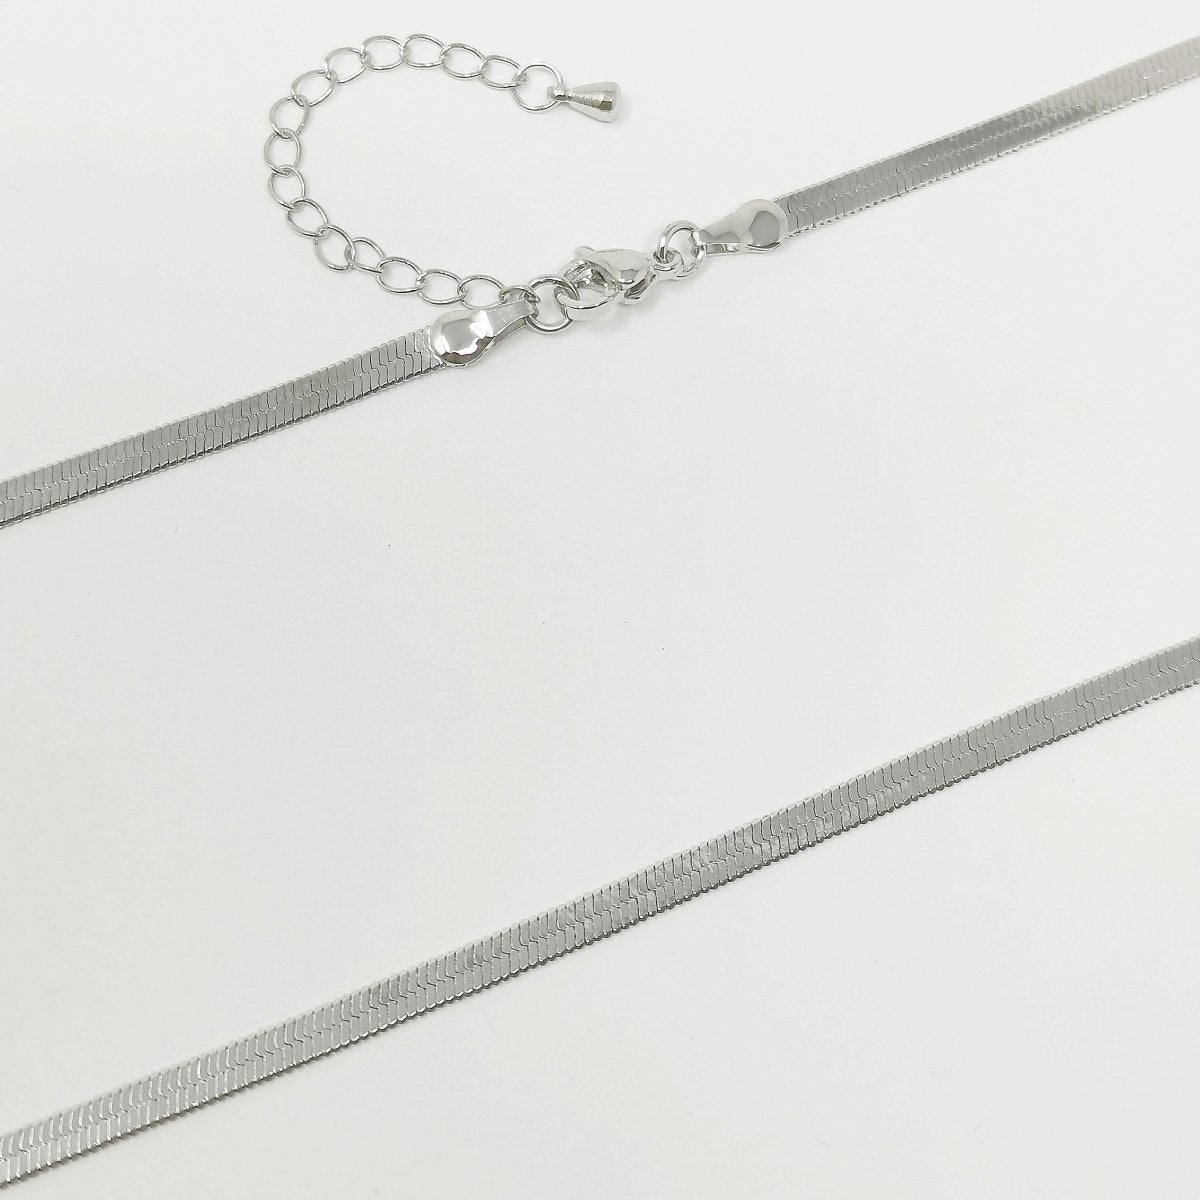 Delicate Silver Herringbone Chain 3.5mm Flat Herringbone Chain Necklace 16, 18, 20.5 Inches with 2" chain extender Gift for Her Everyday Necklace | CN-894 CN-914 CN-919 Clearance Pricing - DLUXCA